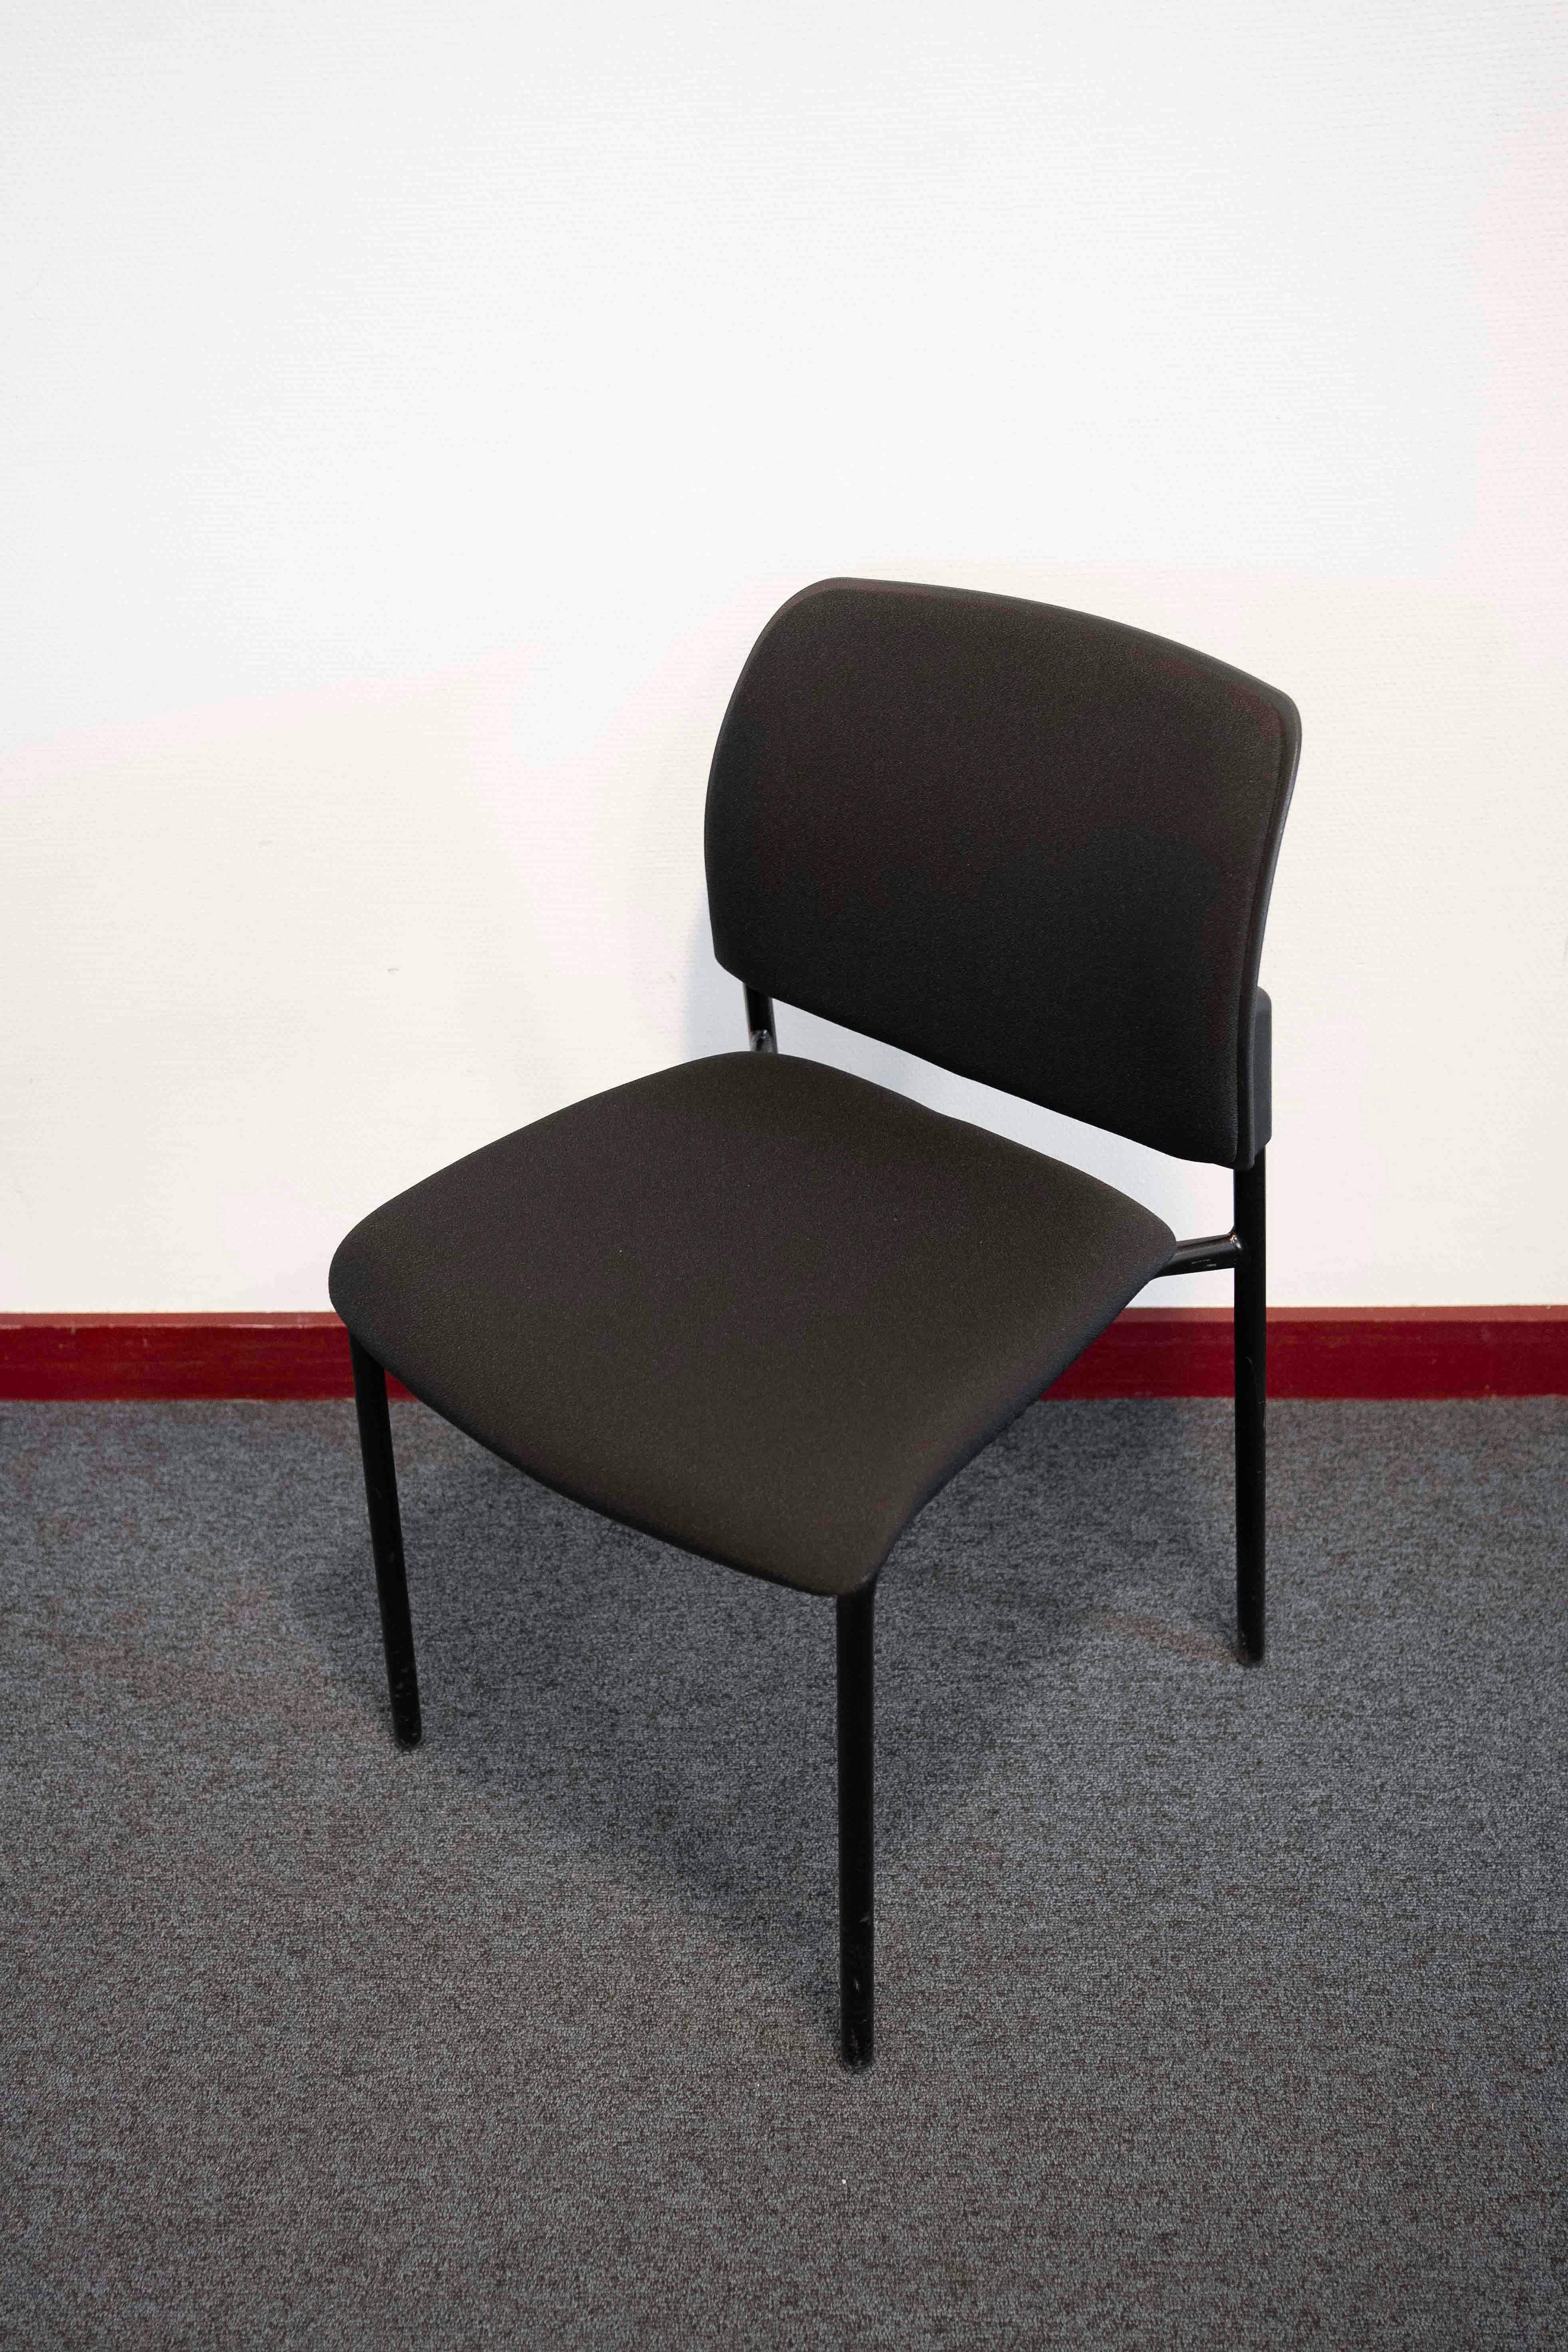 Black meeting chair with tiny black legs - Relieve Furniture